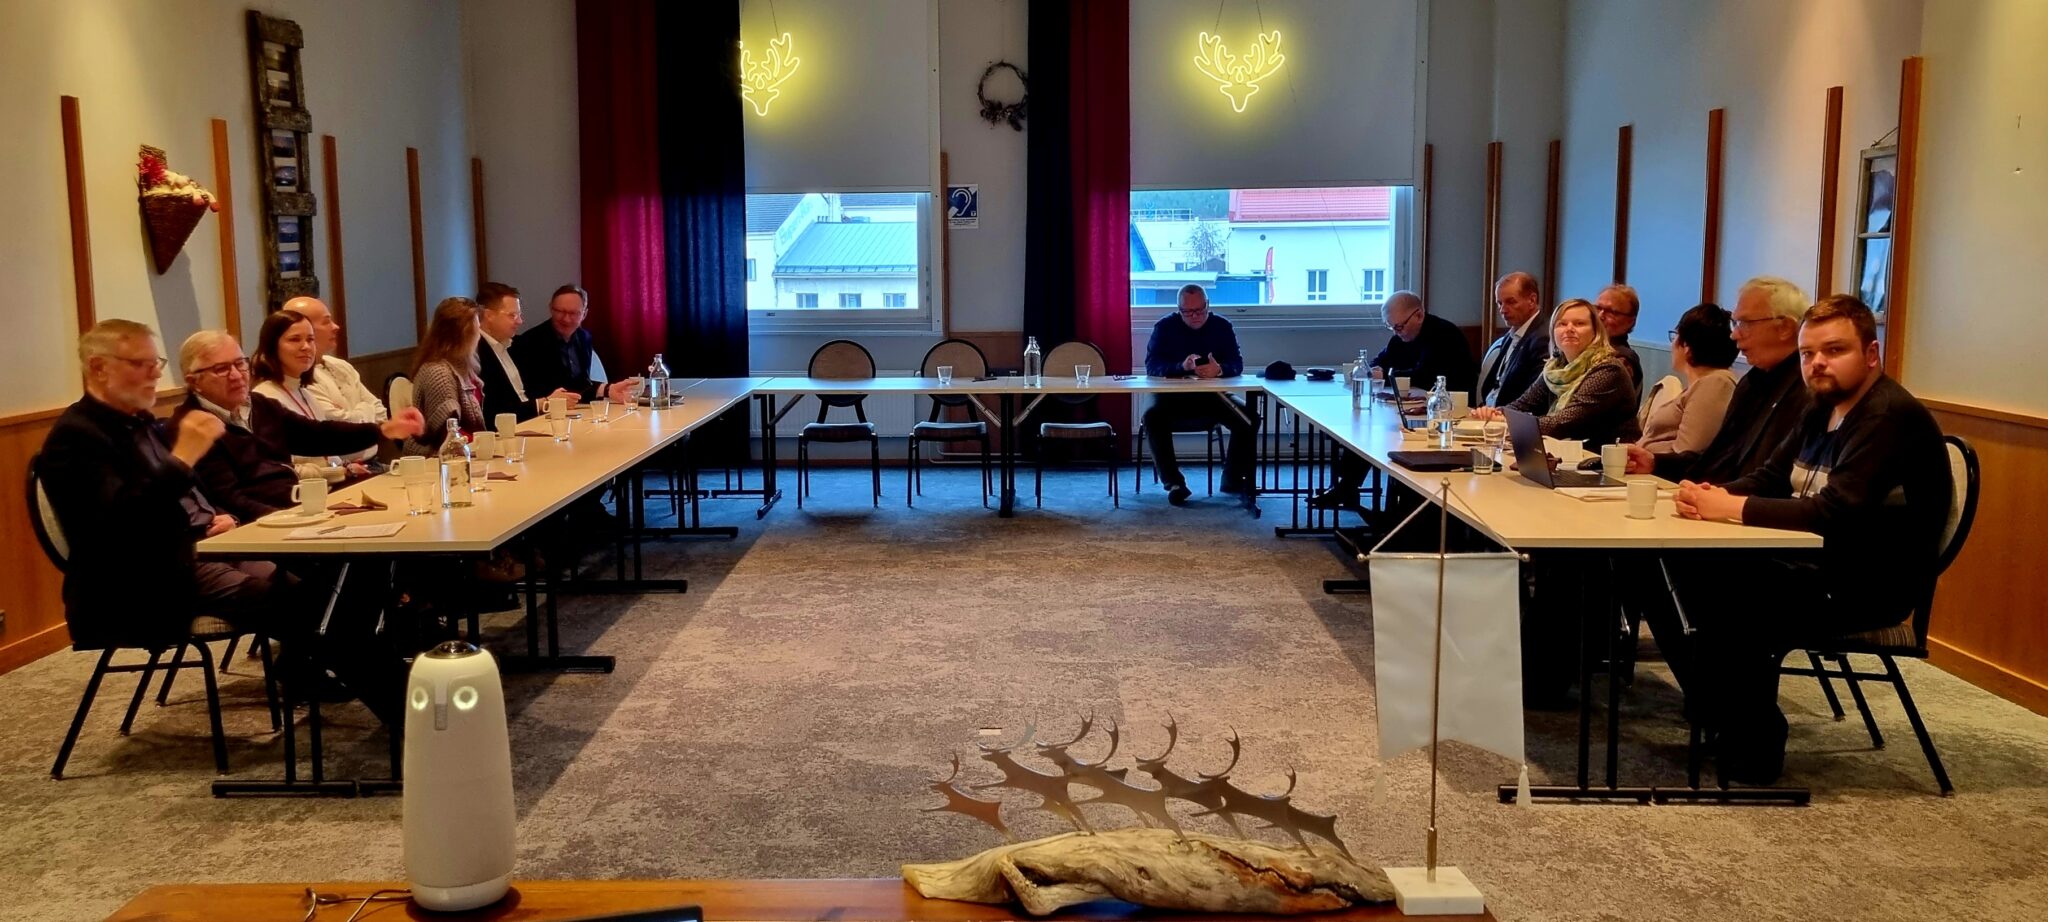 Members of the Rovaniemi Rotary Club and the Rovaniemi Santa Claus Rotary Club in the Kuru cabinet. You could also participate in the hybrid meeting via the network, and our "owl" took care of the video and sound.